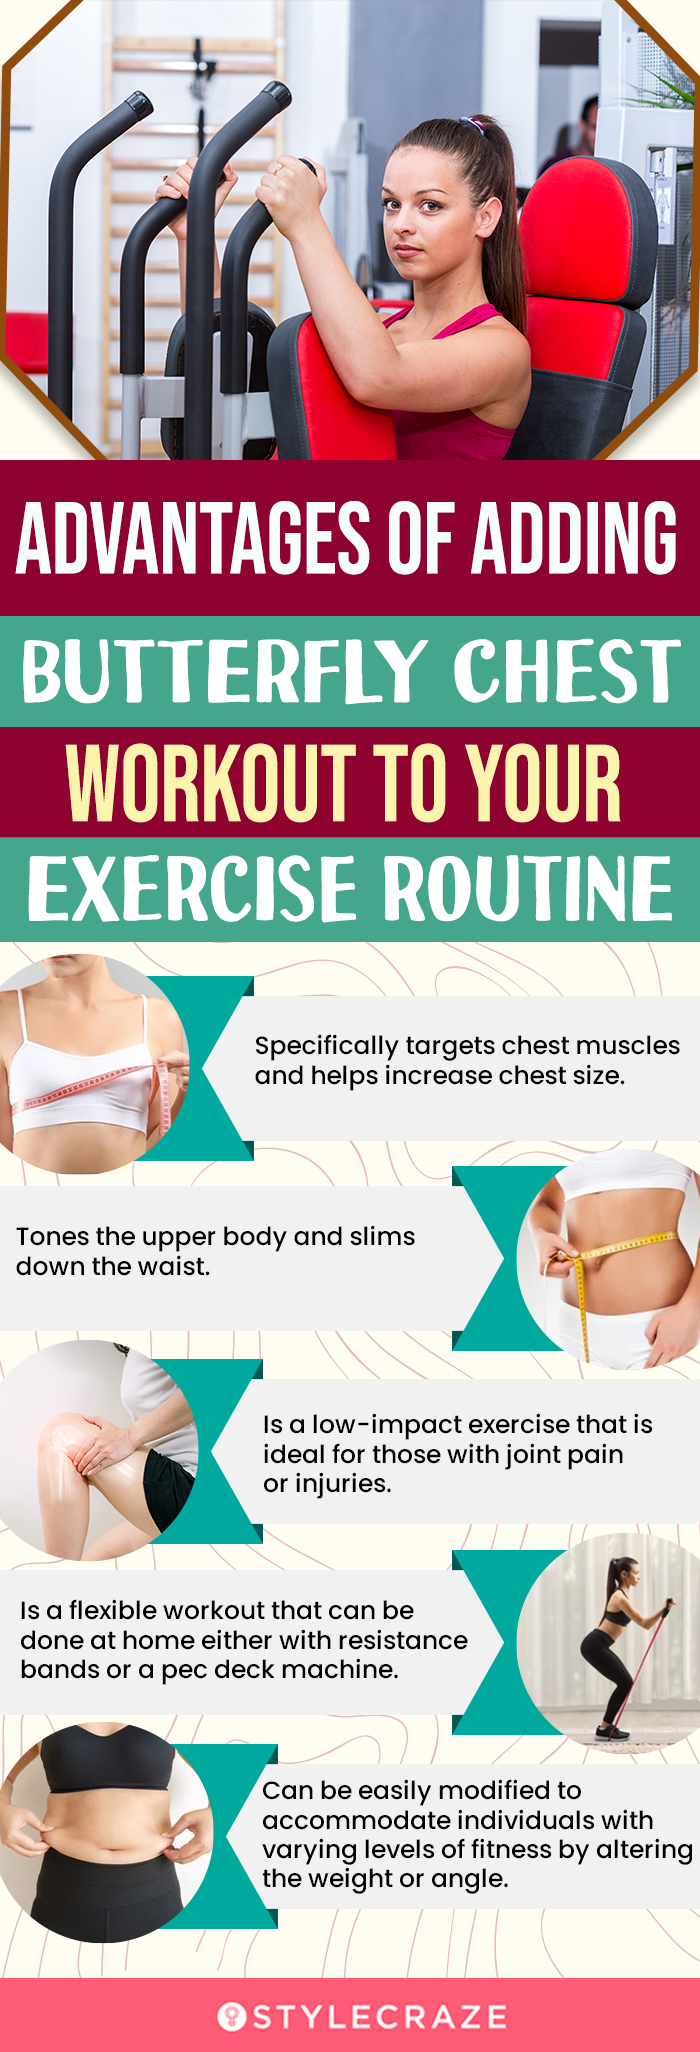 advantages of adding butterfly chest workout to your exercise routine (infographic)